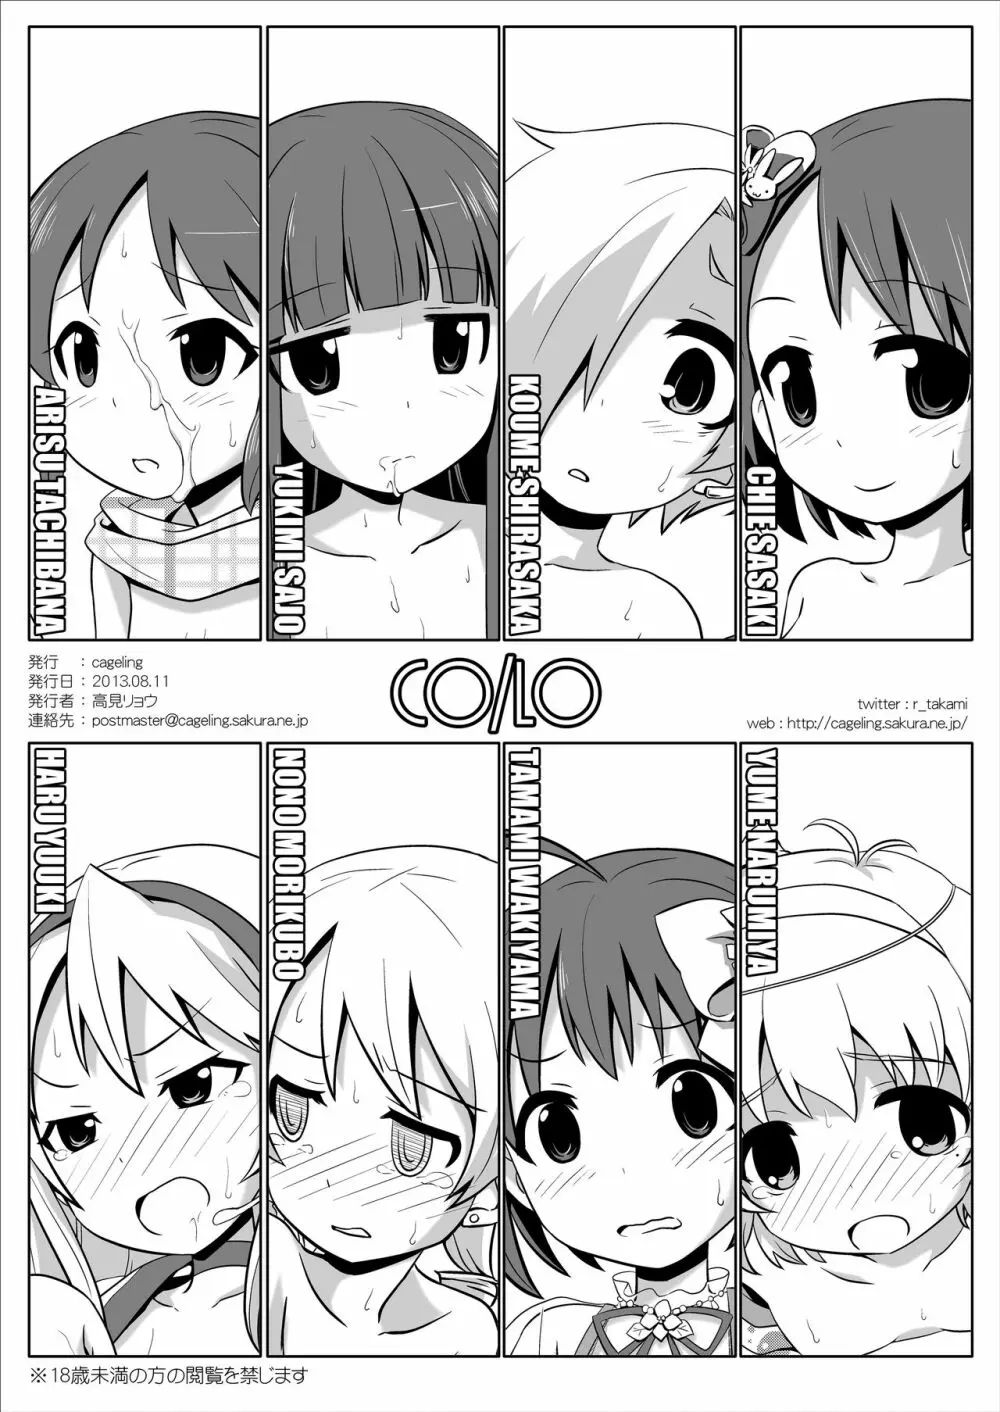 CO/LO 10ページ